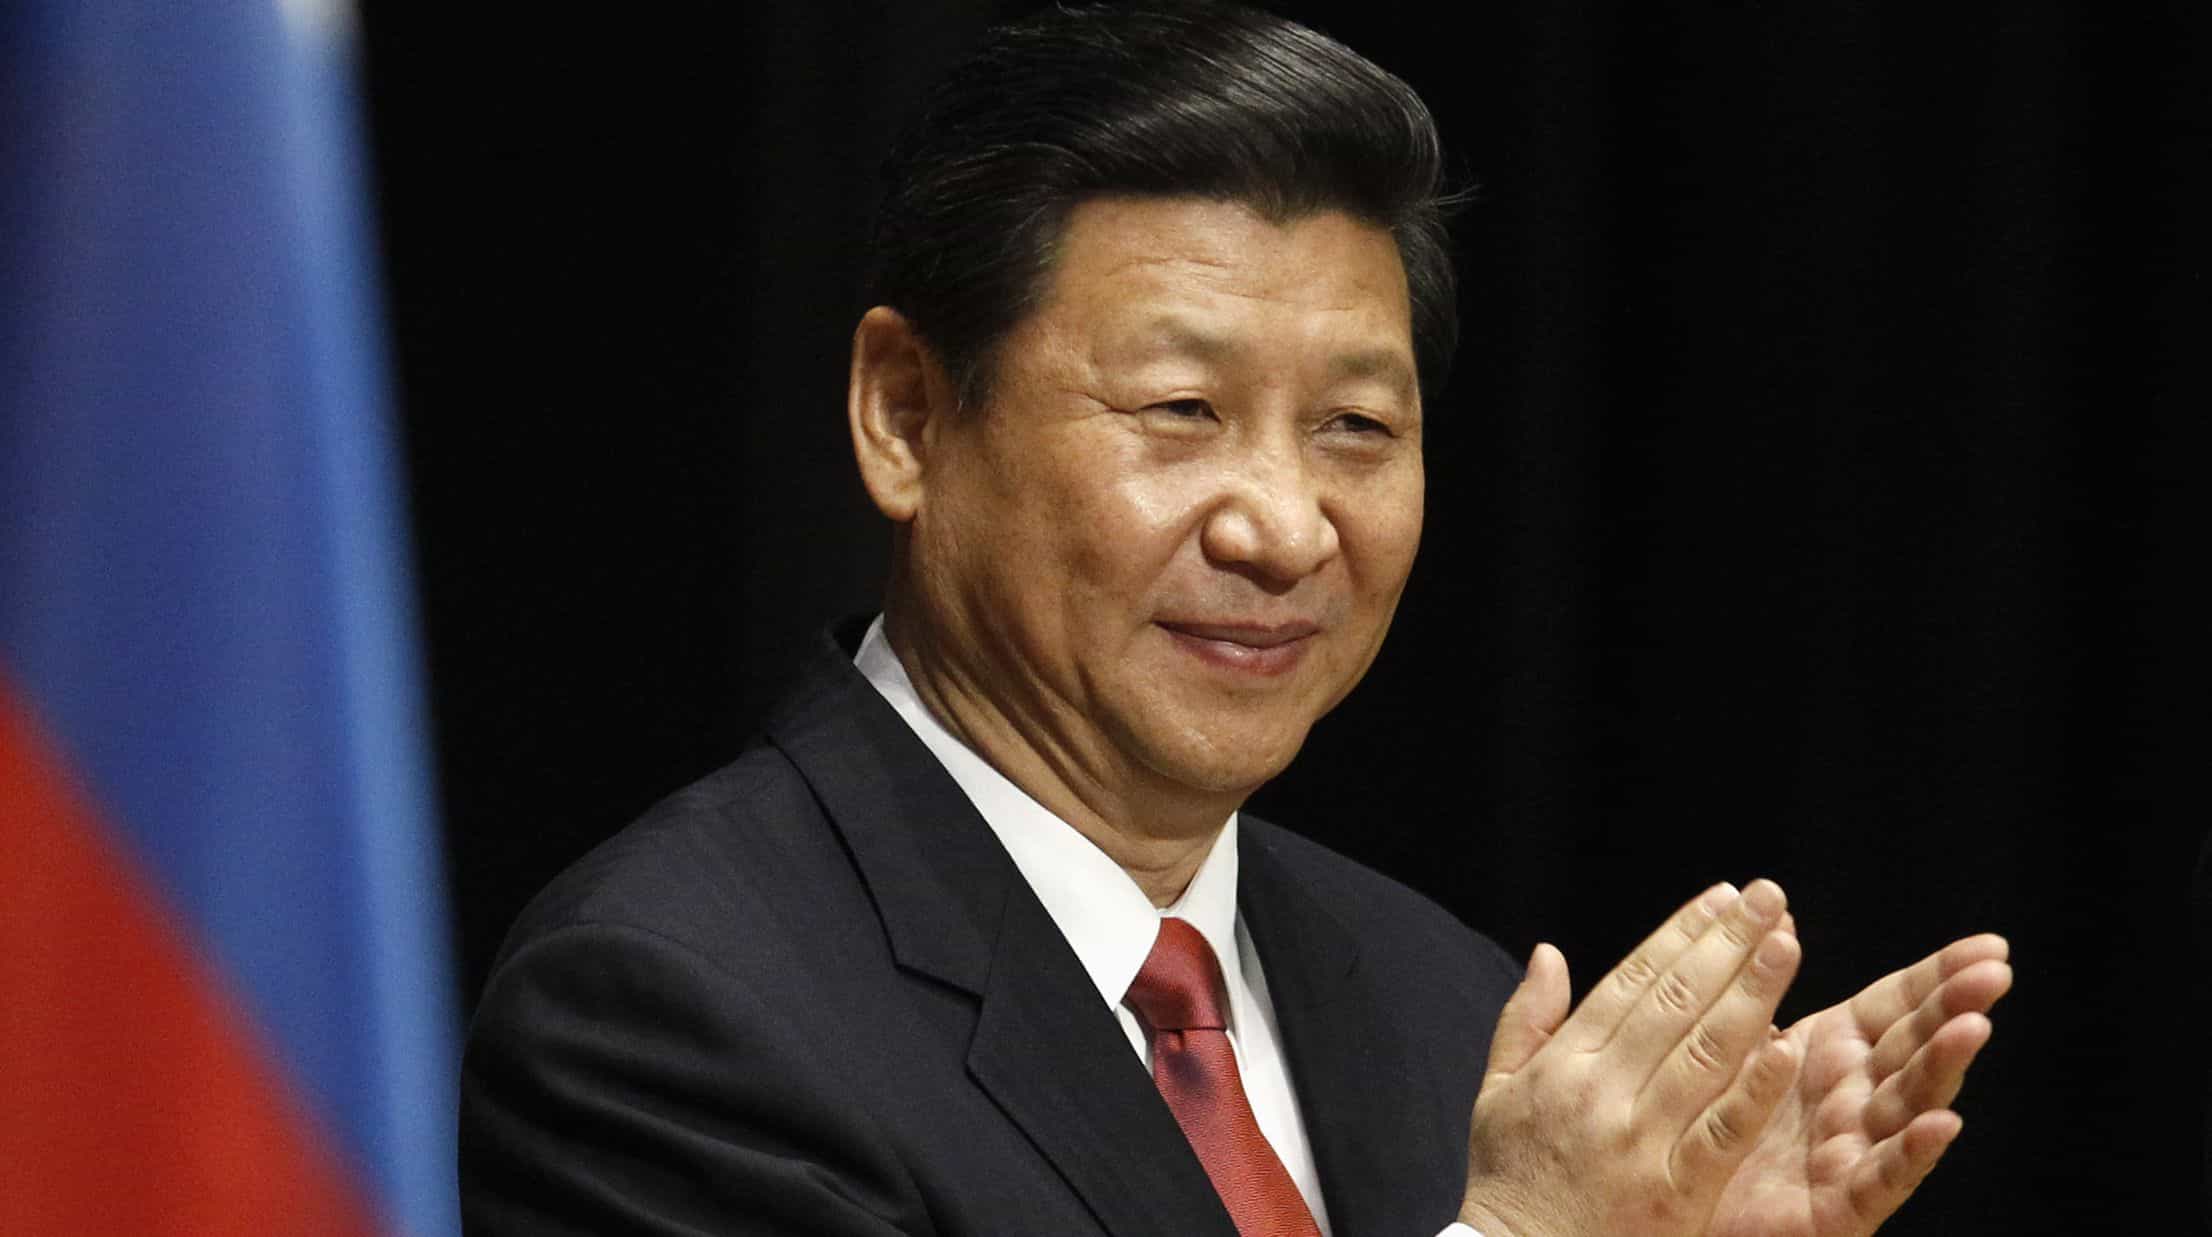 Historic day in China! President Xi Jinping to rule country for life